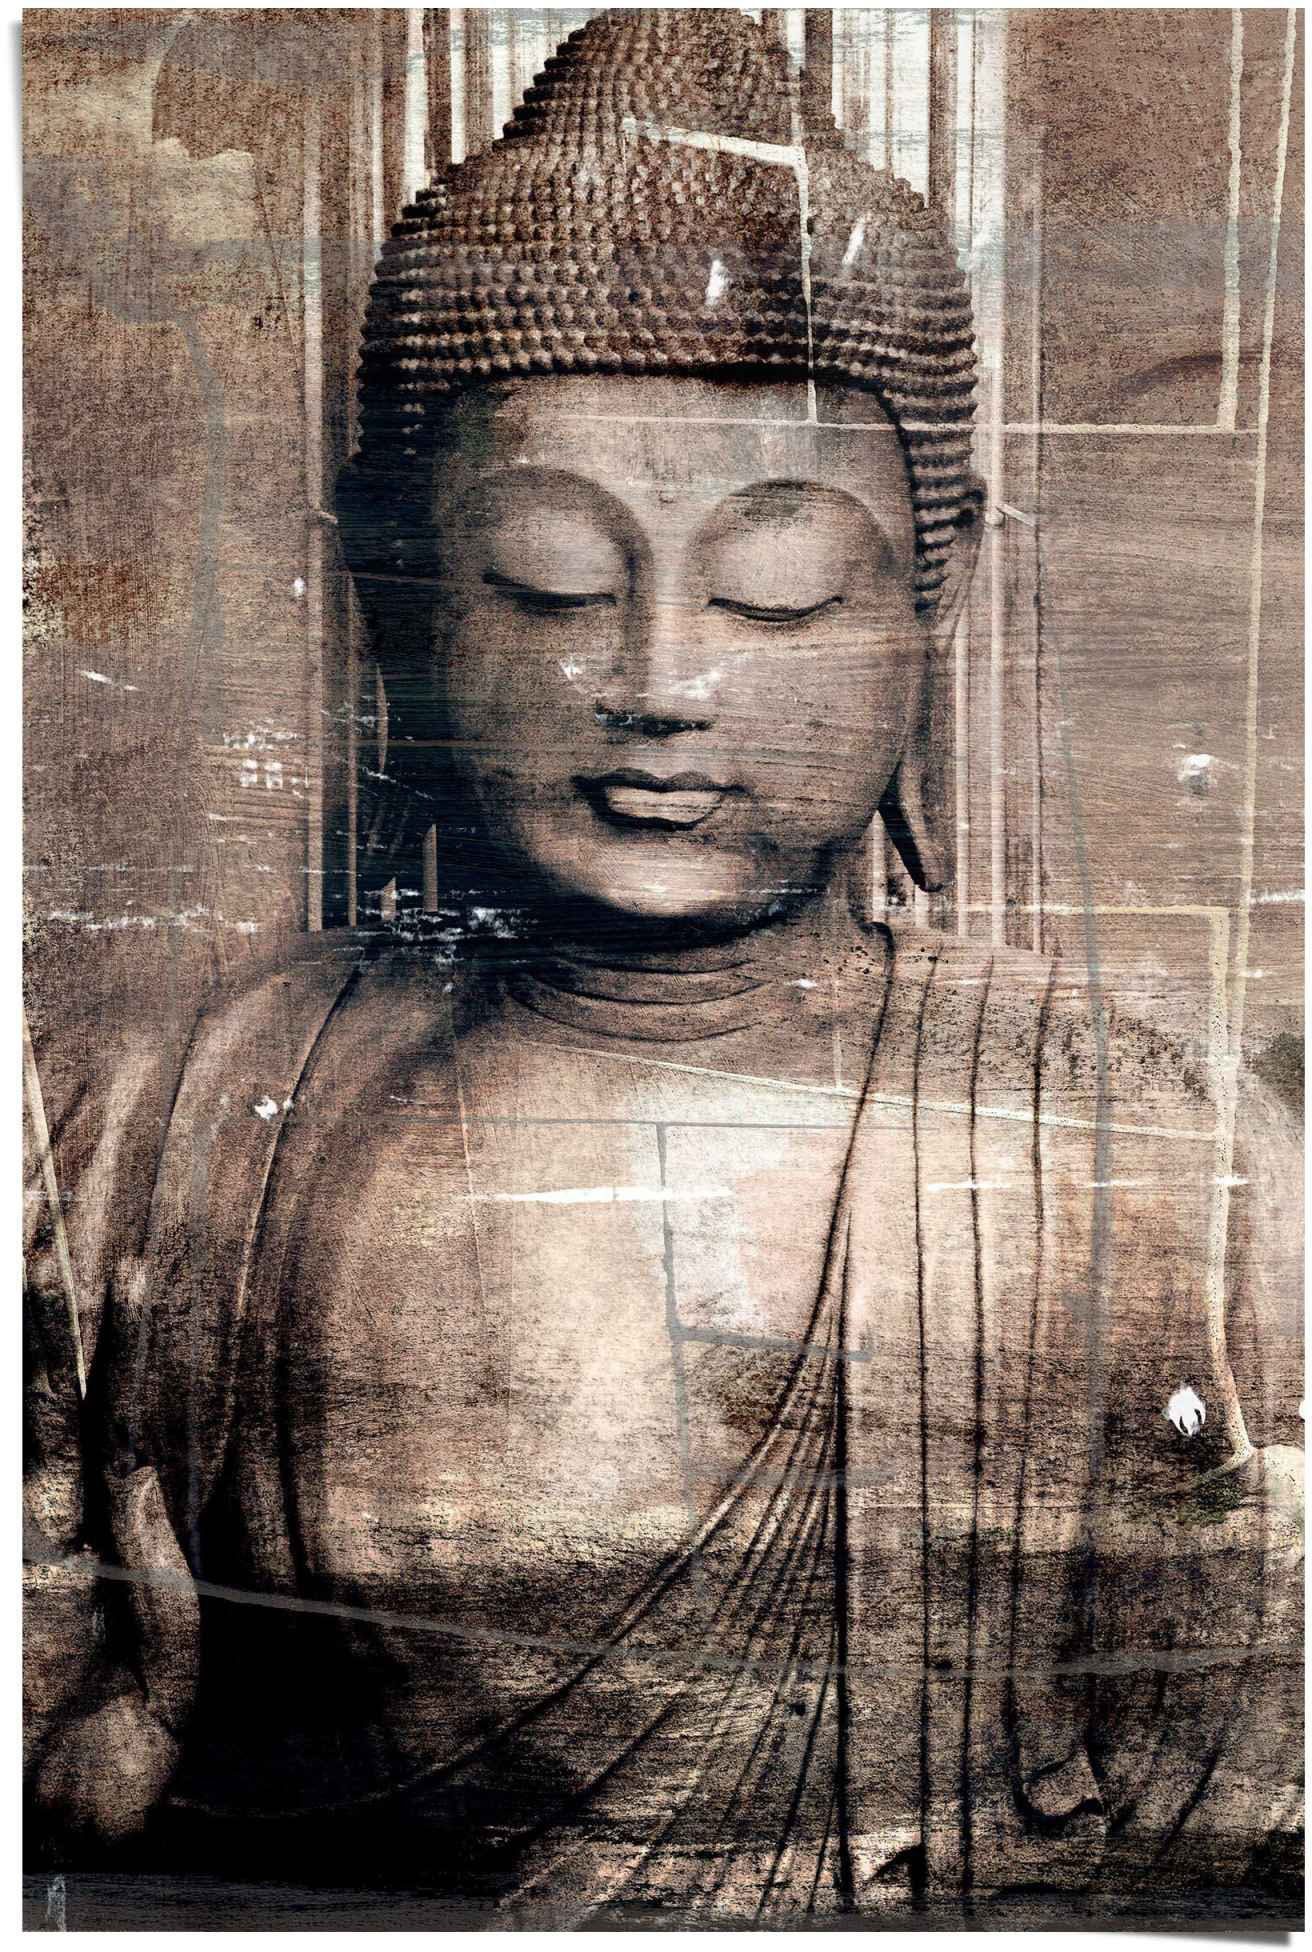 St) Buddha, Reinders! (1 Poster